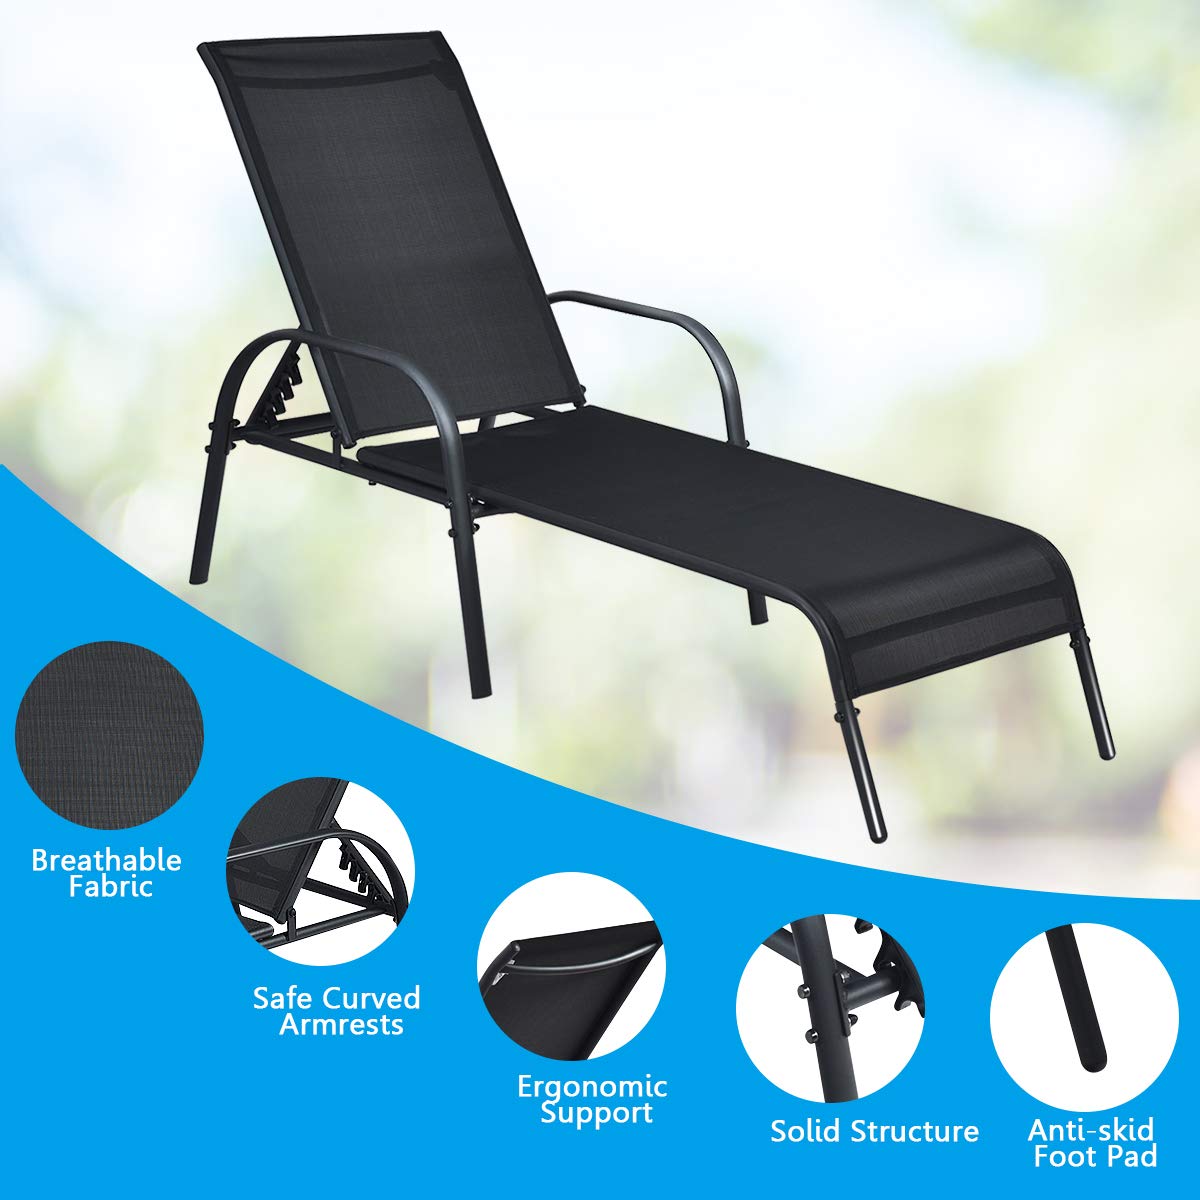 Giantex Adjustable Patio Chaise Lounge, Outdoor Folding Lounge Recliner Chairs